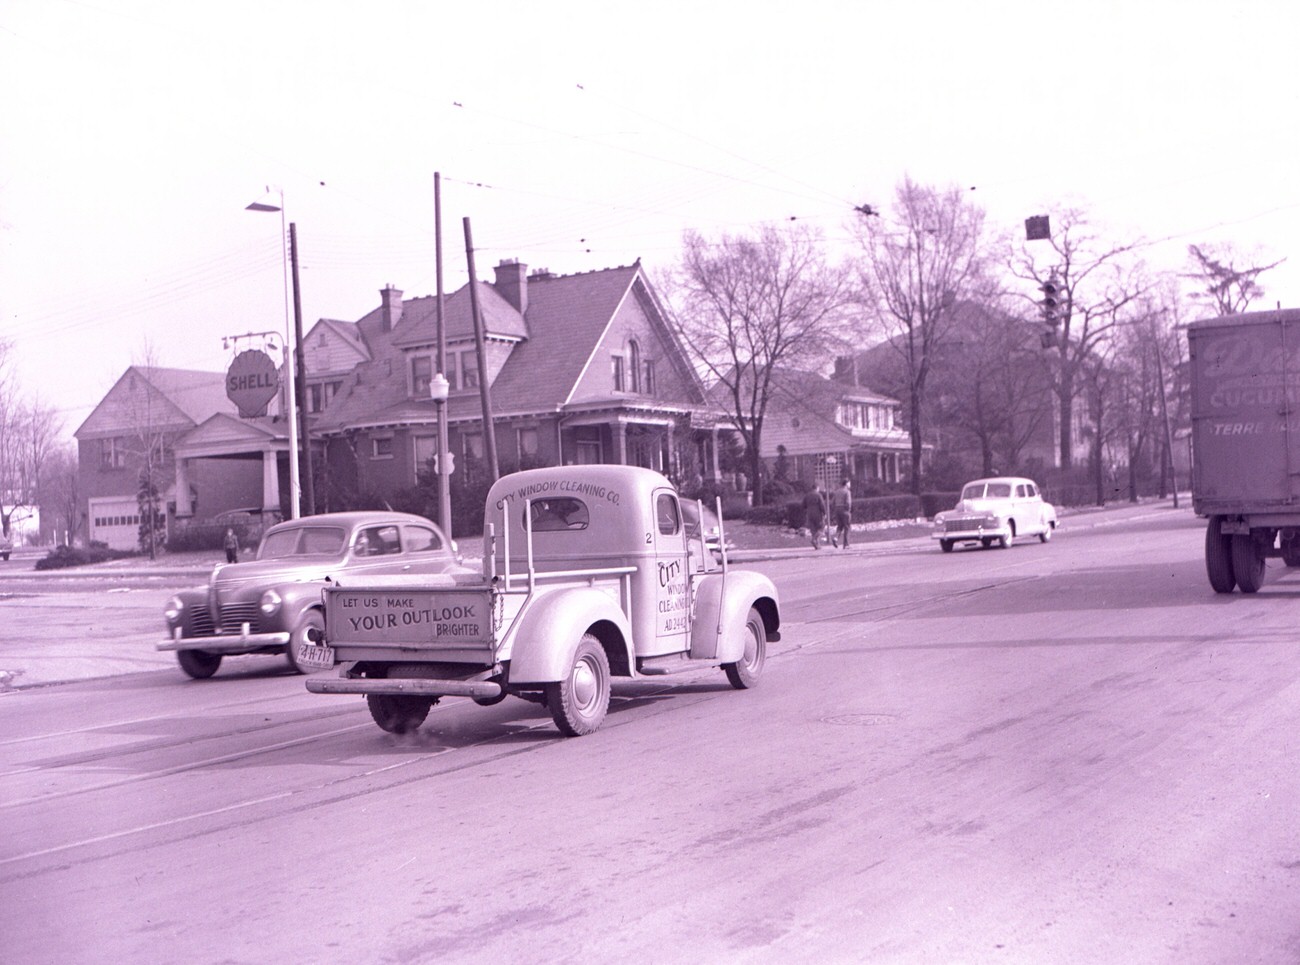 City Window Cleaning Company Truck on East Main Street in Bexley, passing notable buildings including Hatch's Shell Service and Moody & Straley Funeral Home, 1946.